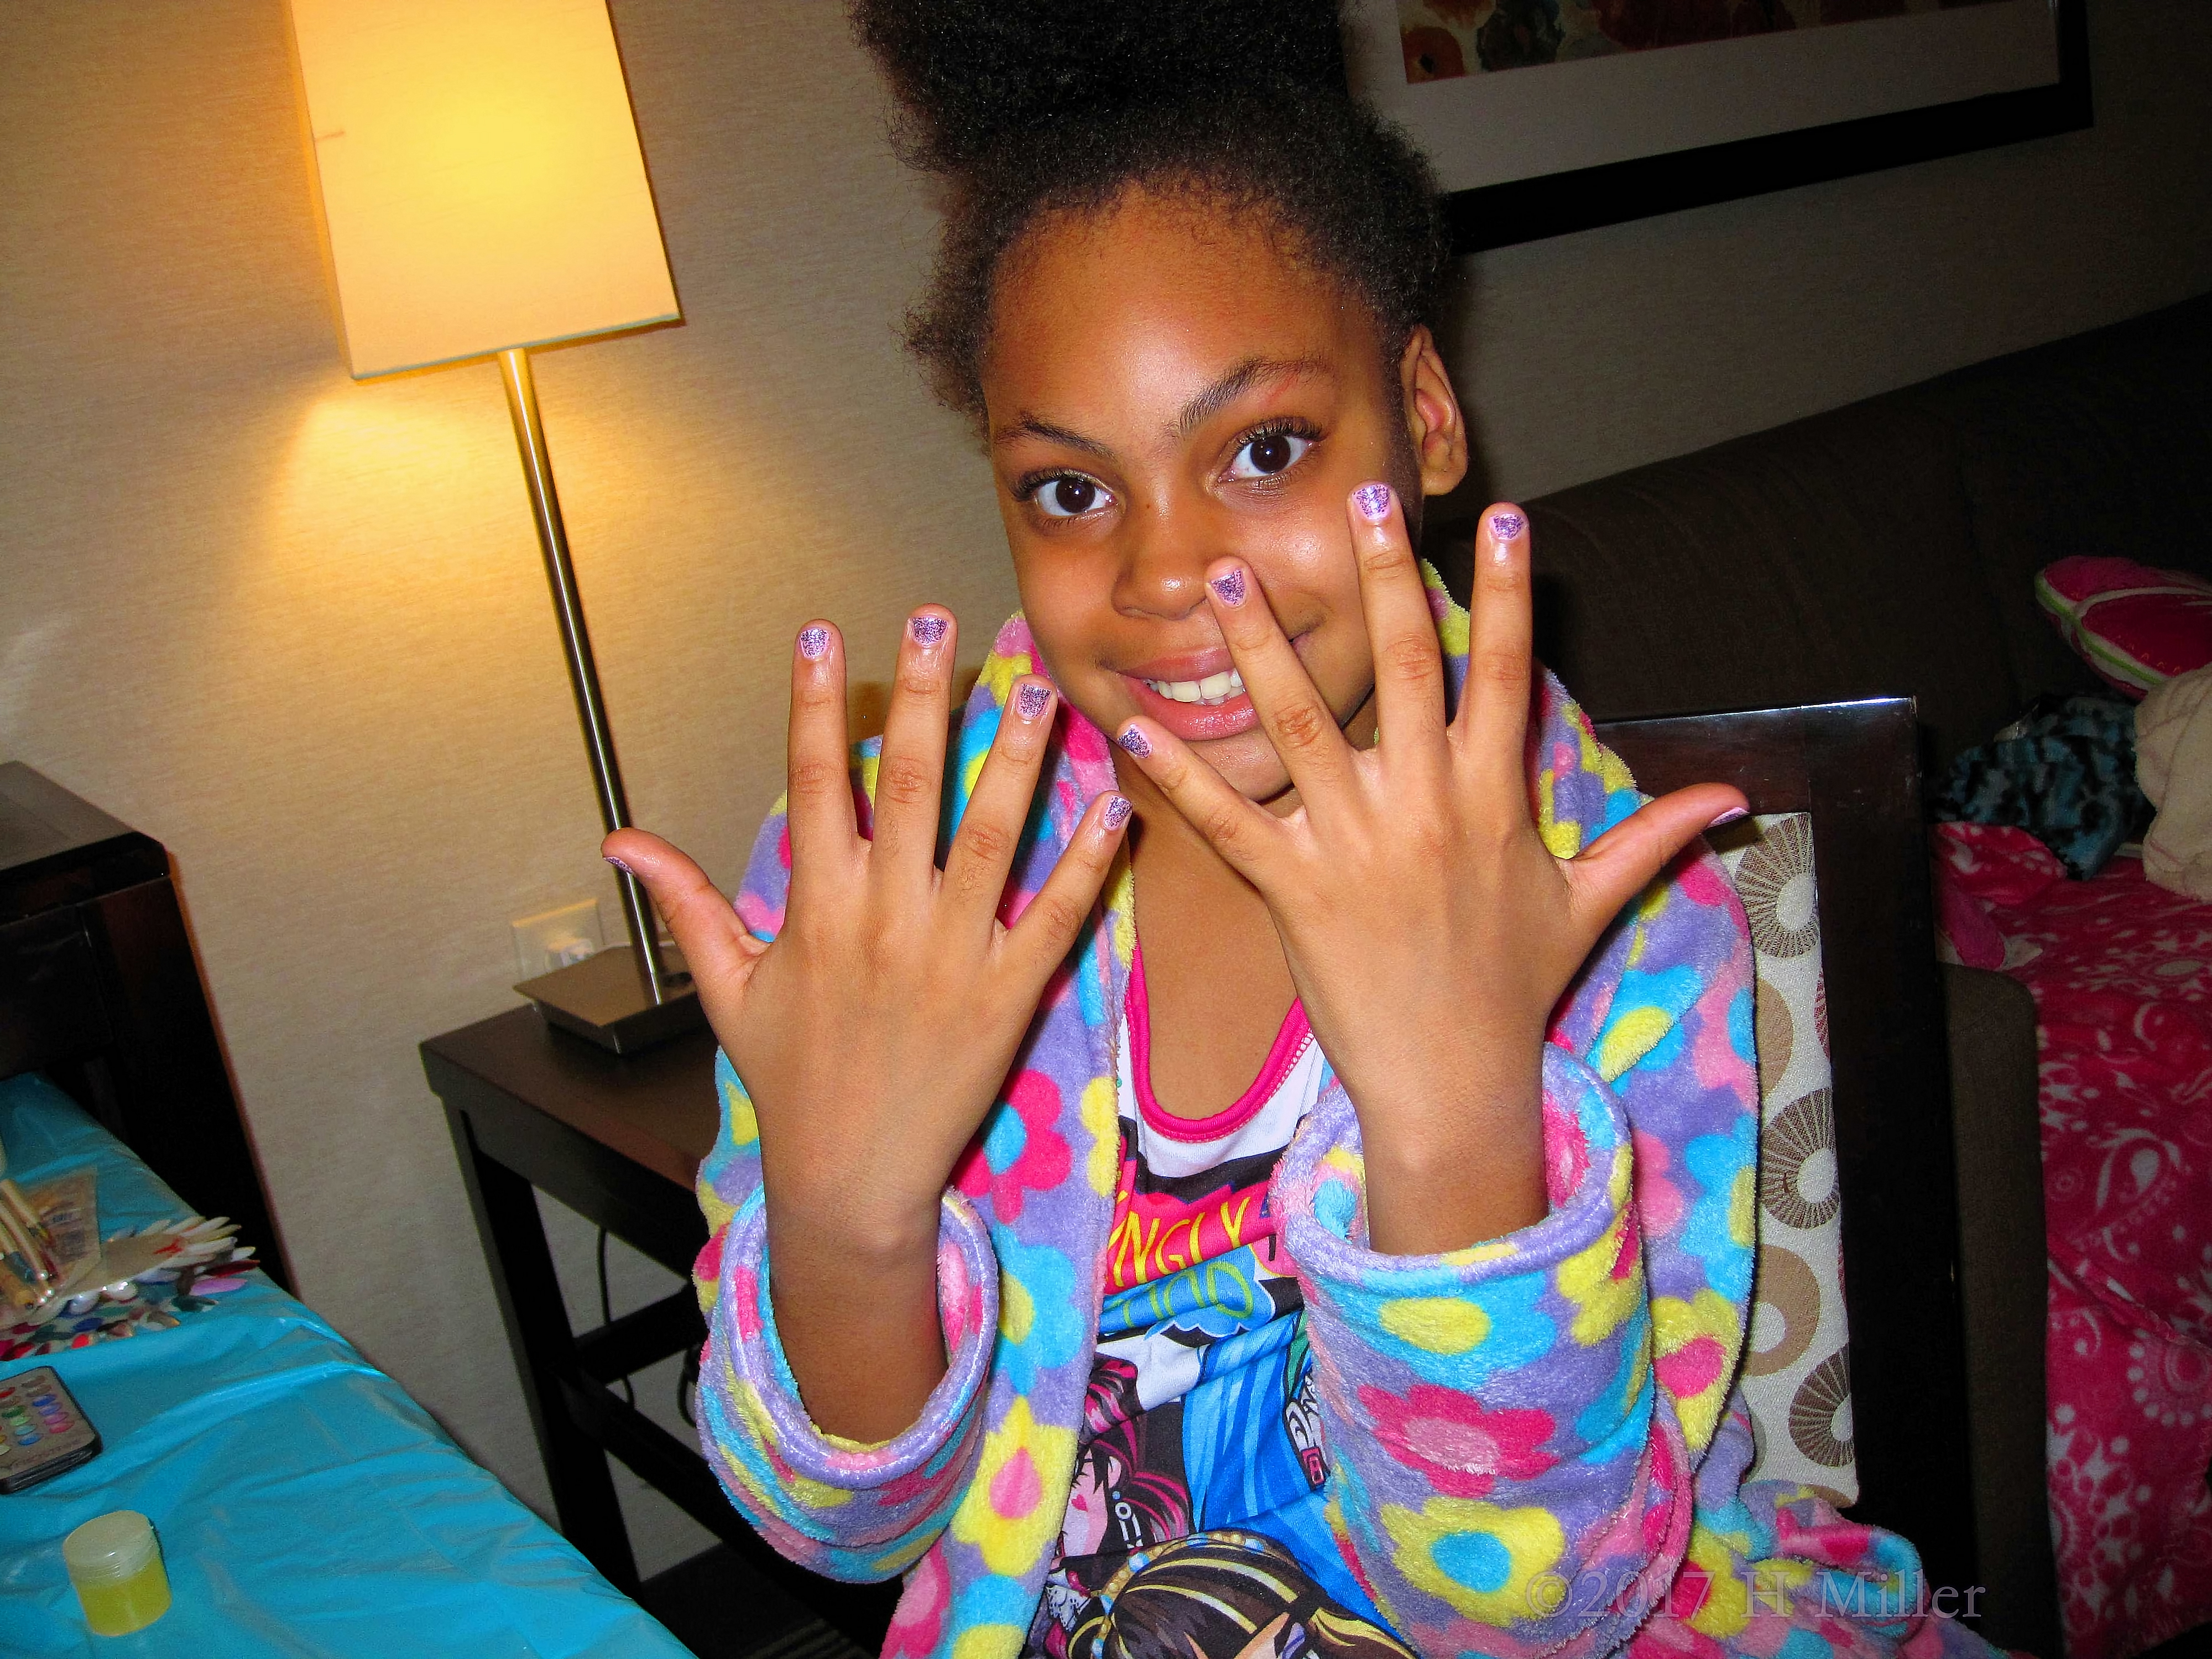 Smiling With Her New Girls Manicure. 4